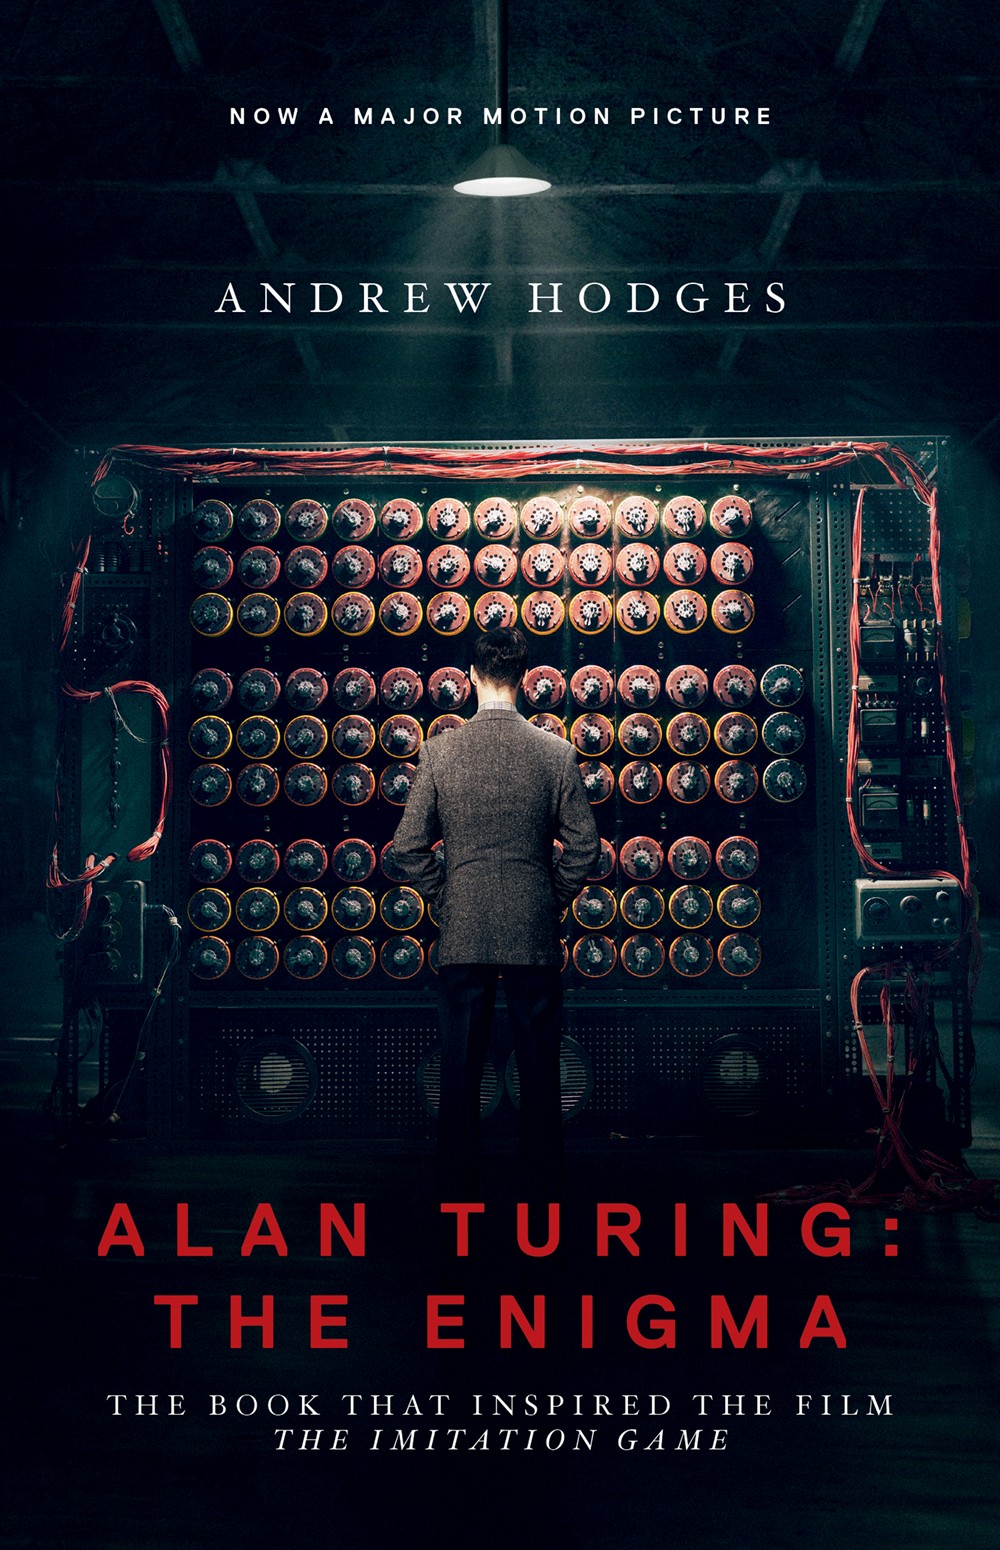 Hodges, Andrew, ALAN TURING: THE ENIGMA, (S&S, 1983; re-released by Princeton U. Press, 2012)